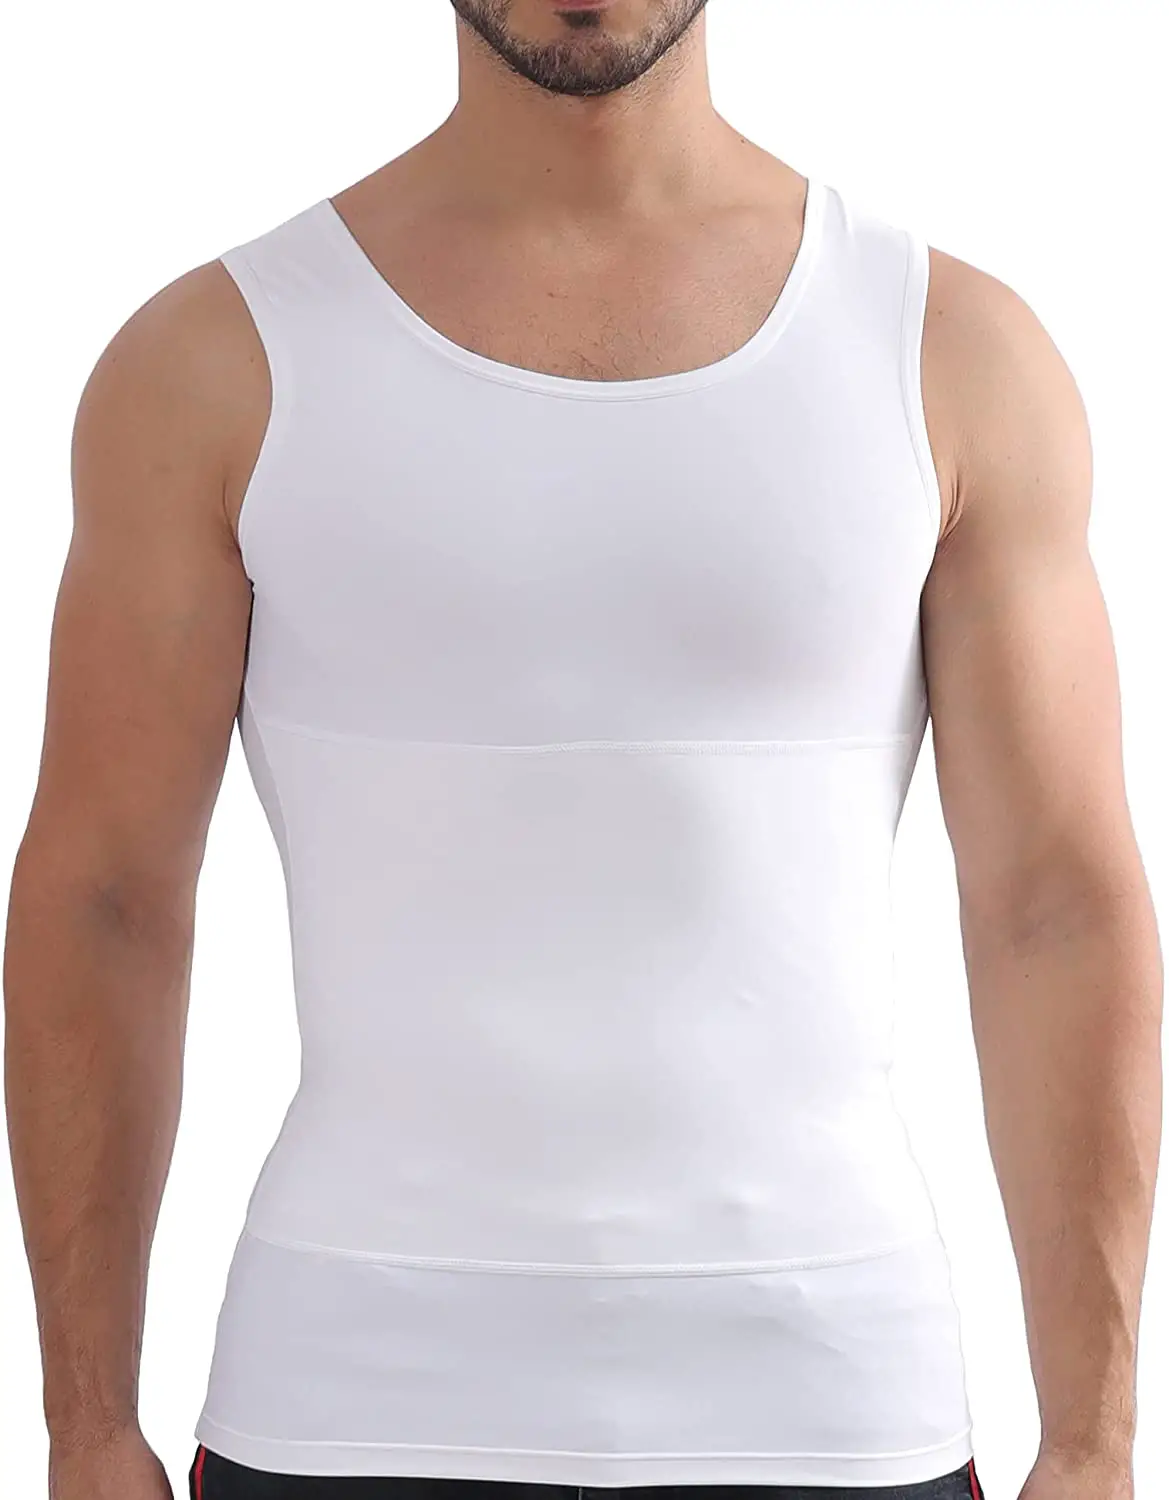 How to choose Undershirt for Men: Undershirts Guide with 5 Types Of ...